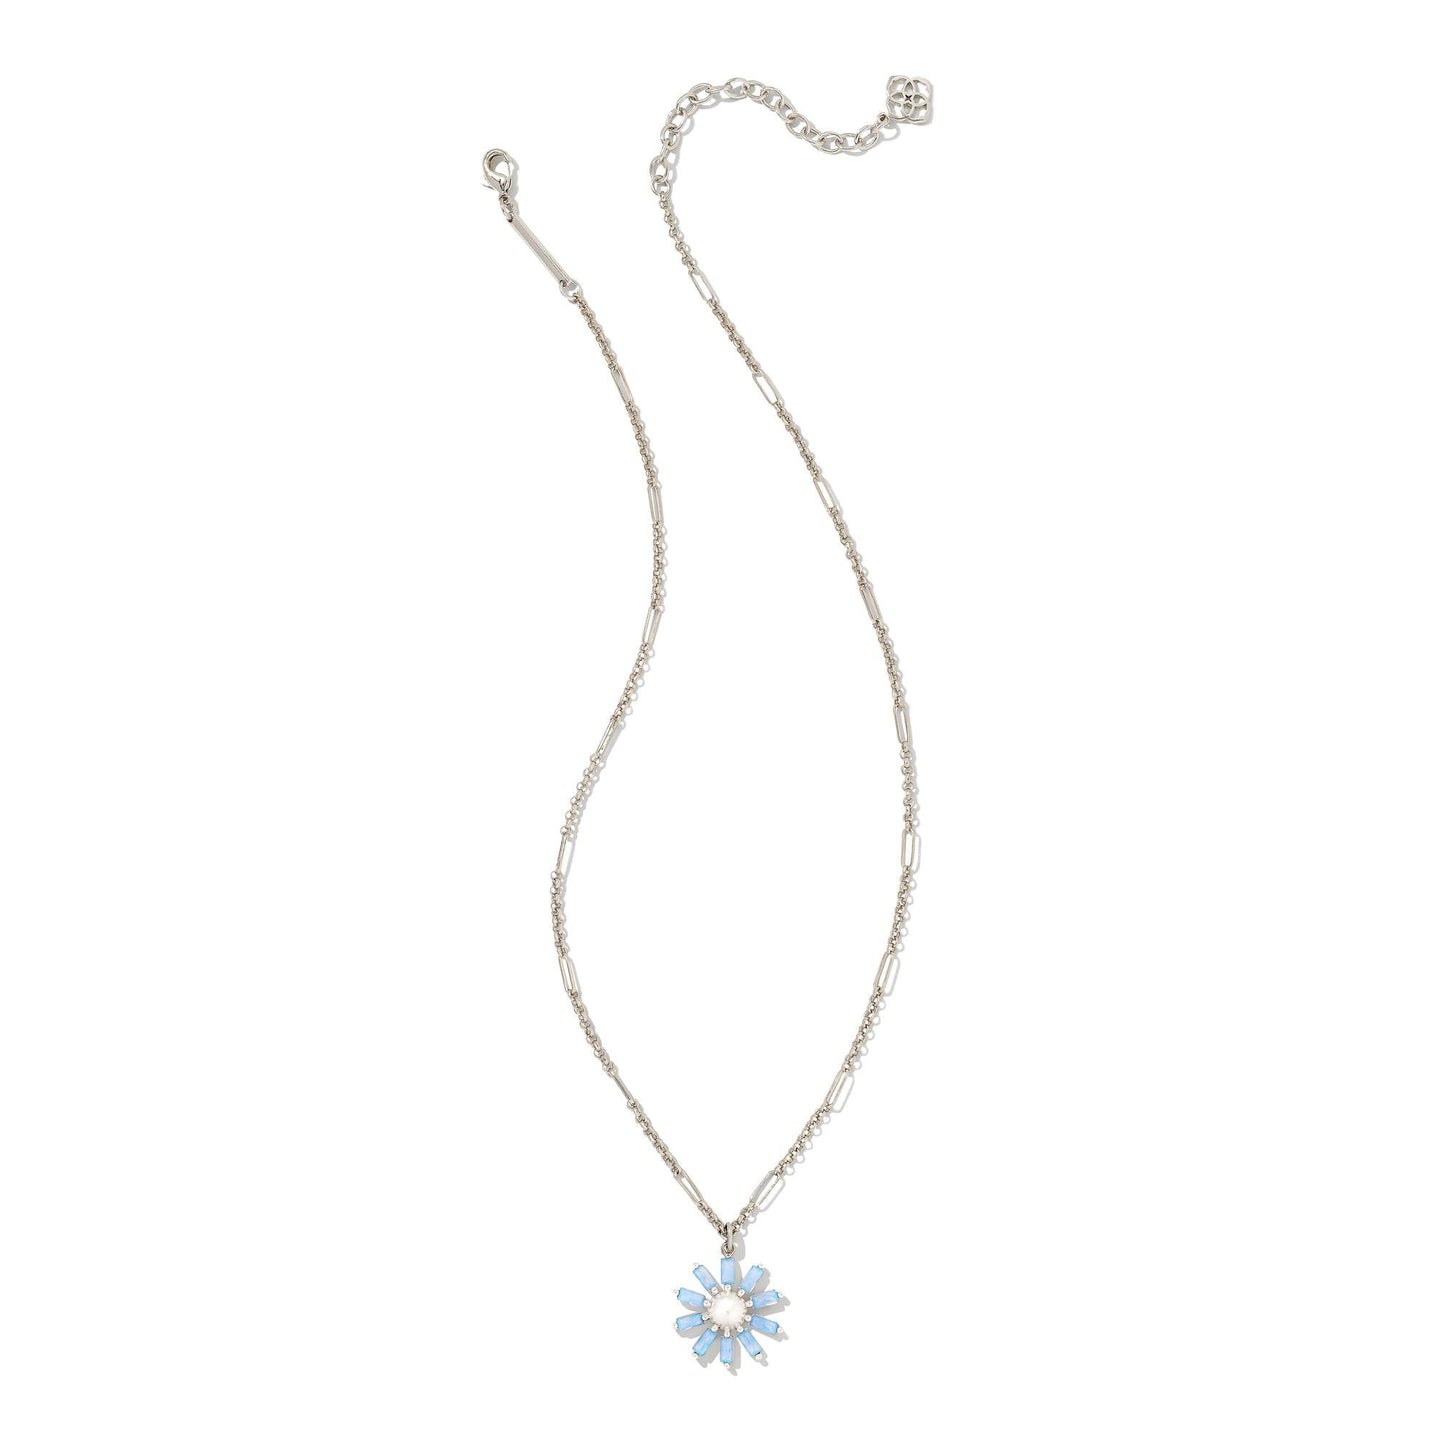 Madison Daisy Short Necklace in Bright Silver and Light Blue Opal